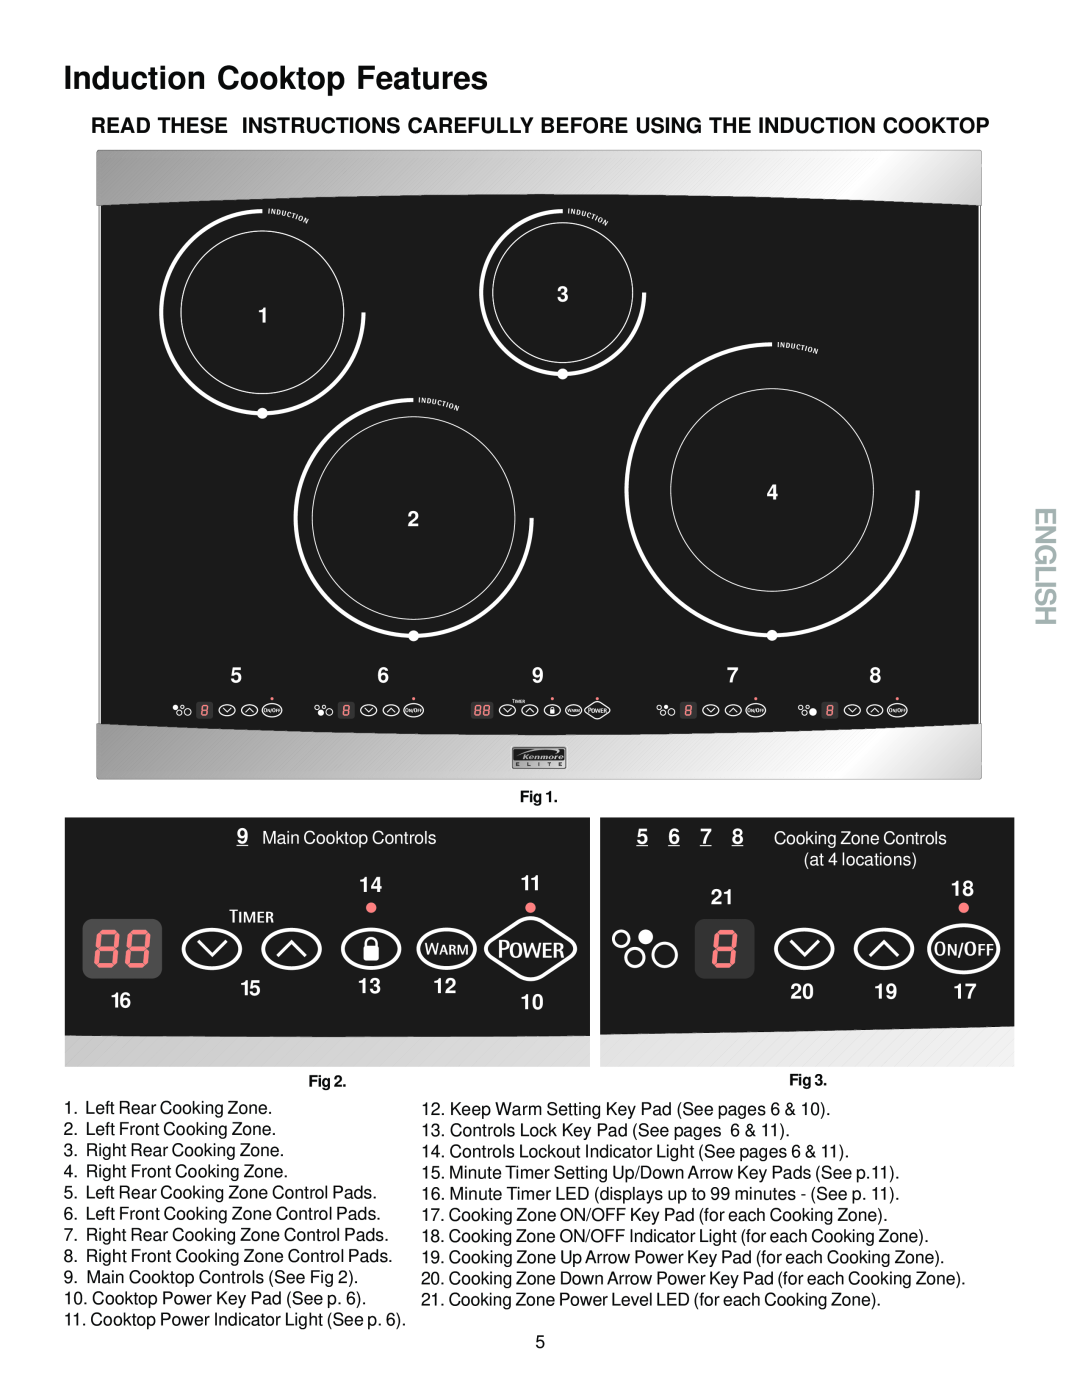 Sears 790.428 Induction Cooktop Features, English, Main Cooktop Controls, 5 6 7 8 Cooking Zone Controls, at 4 locations 